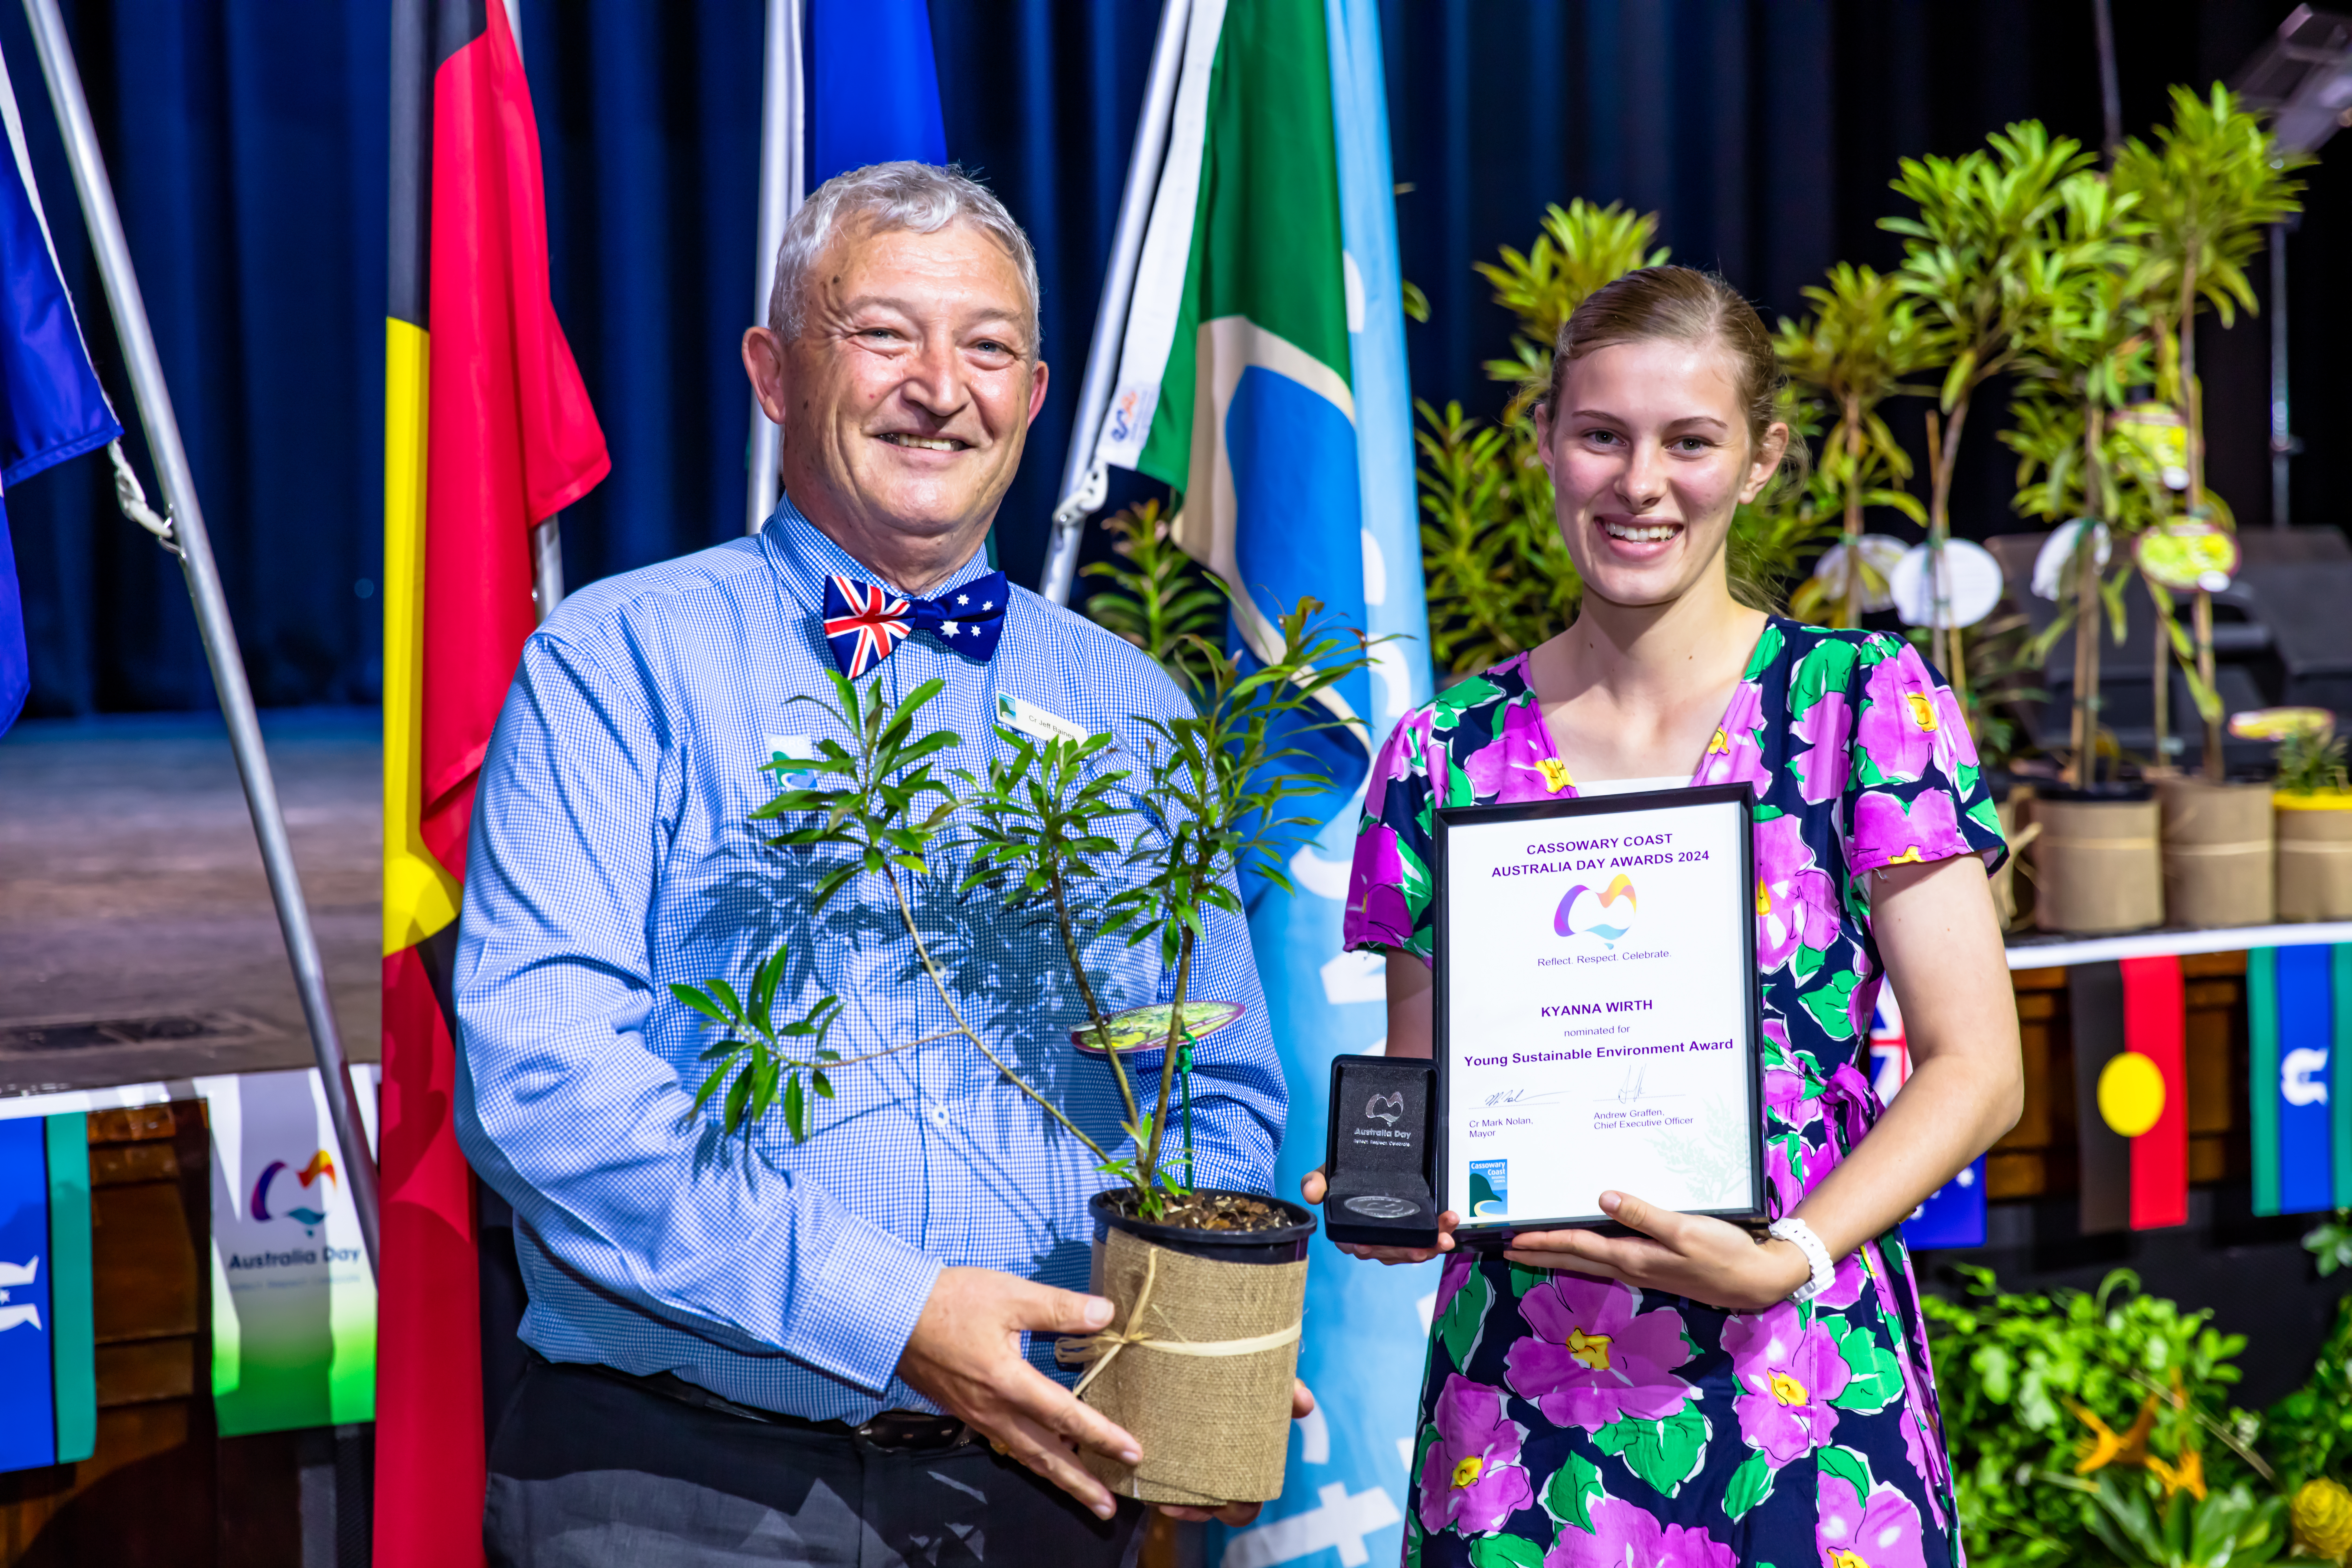 Young Sustainable Environment Award